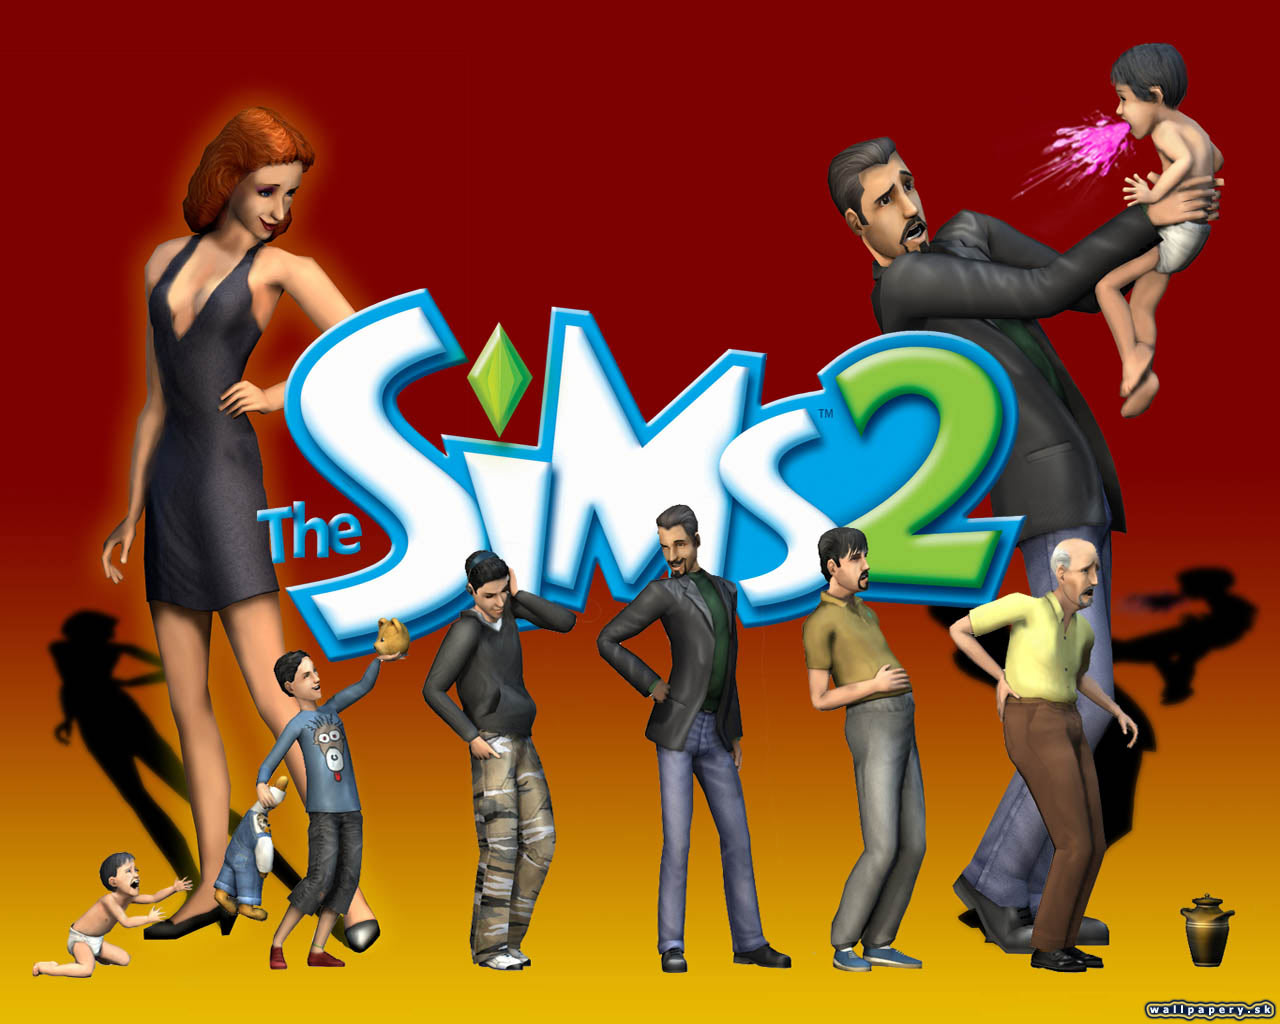 The Sims 2 - wallpaper 2